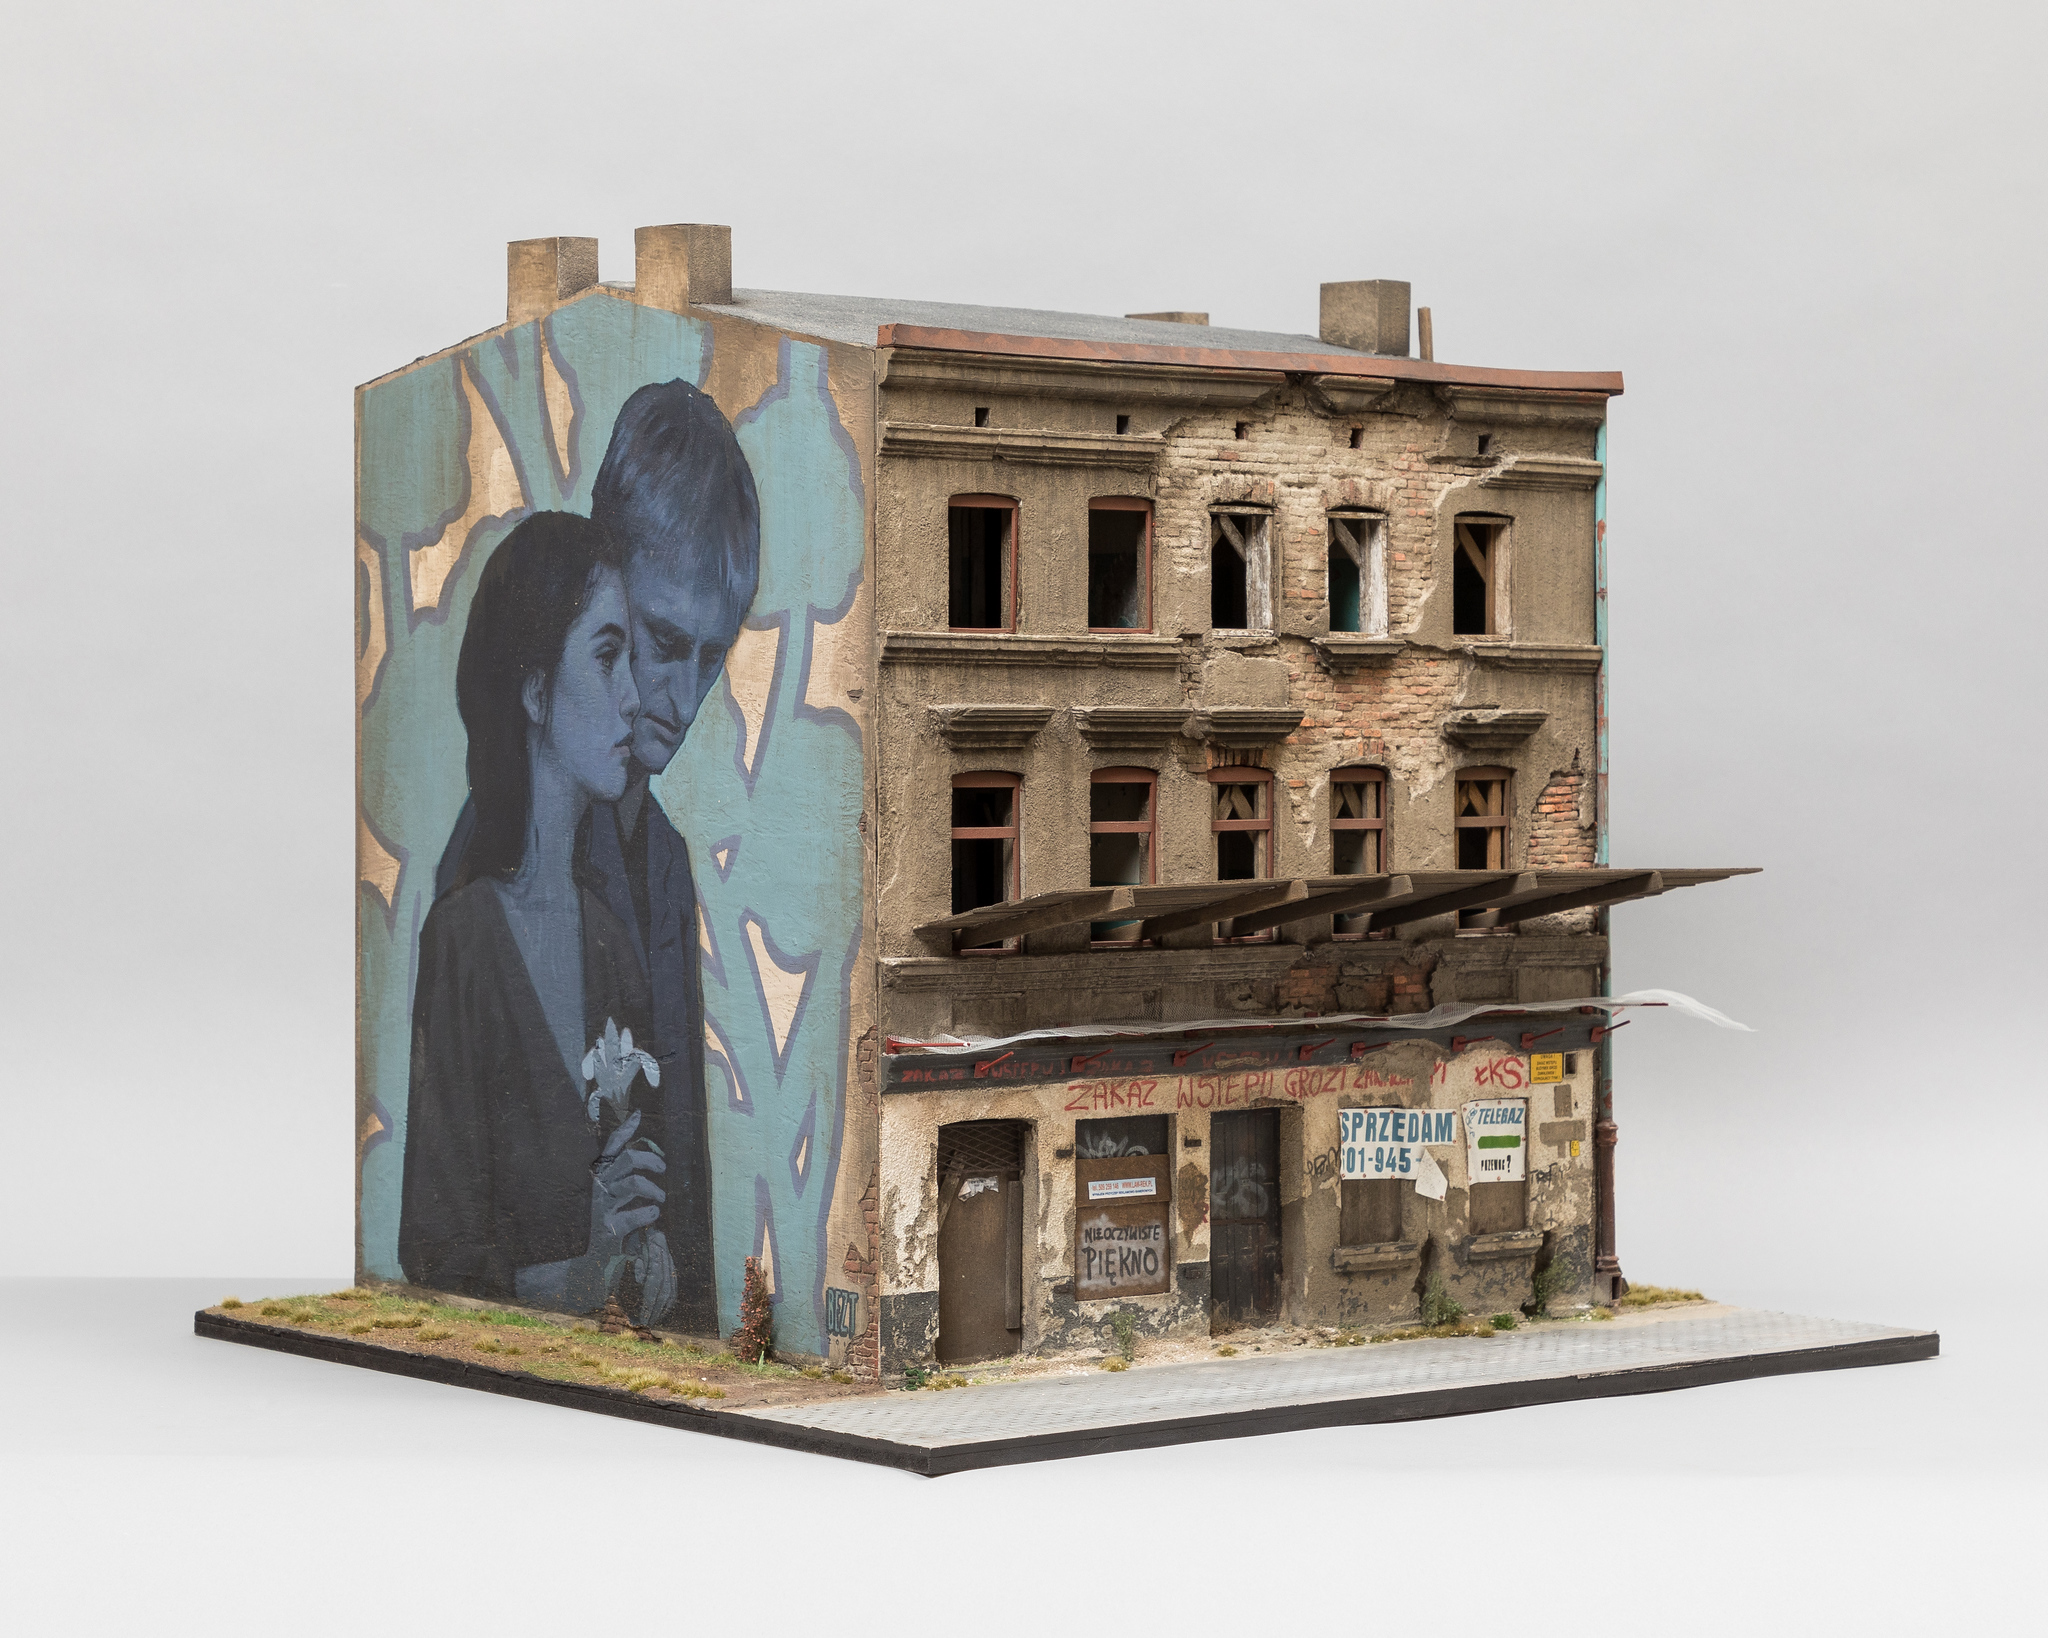 A scale model of an aging apartment building with posters and crumbling signs on the front. On the side, a mural of two figures covers the blank end.